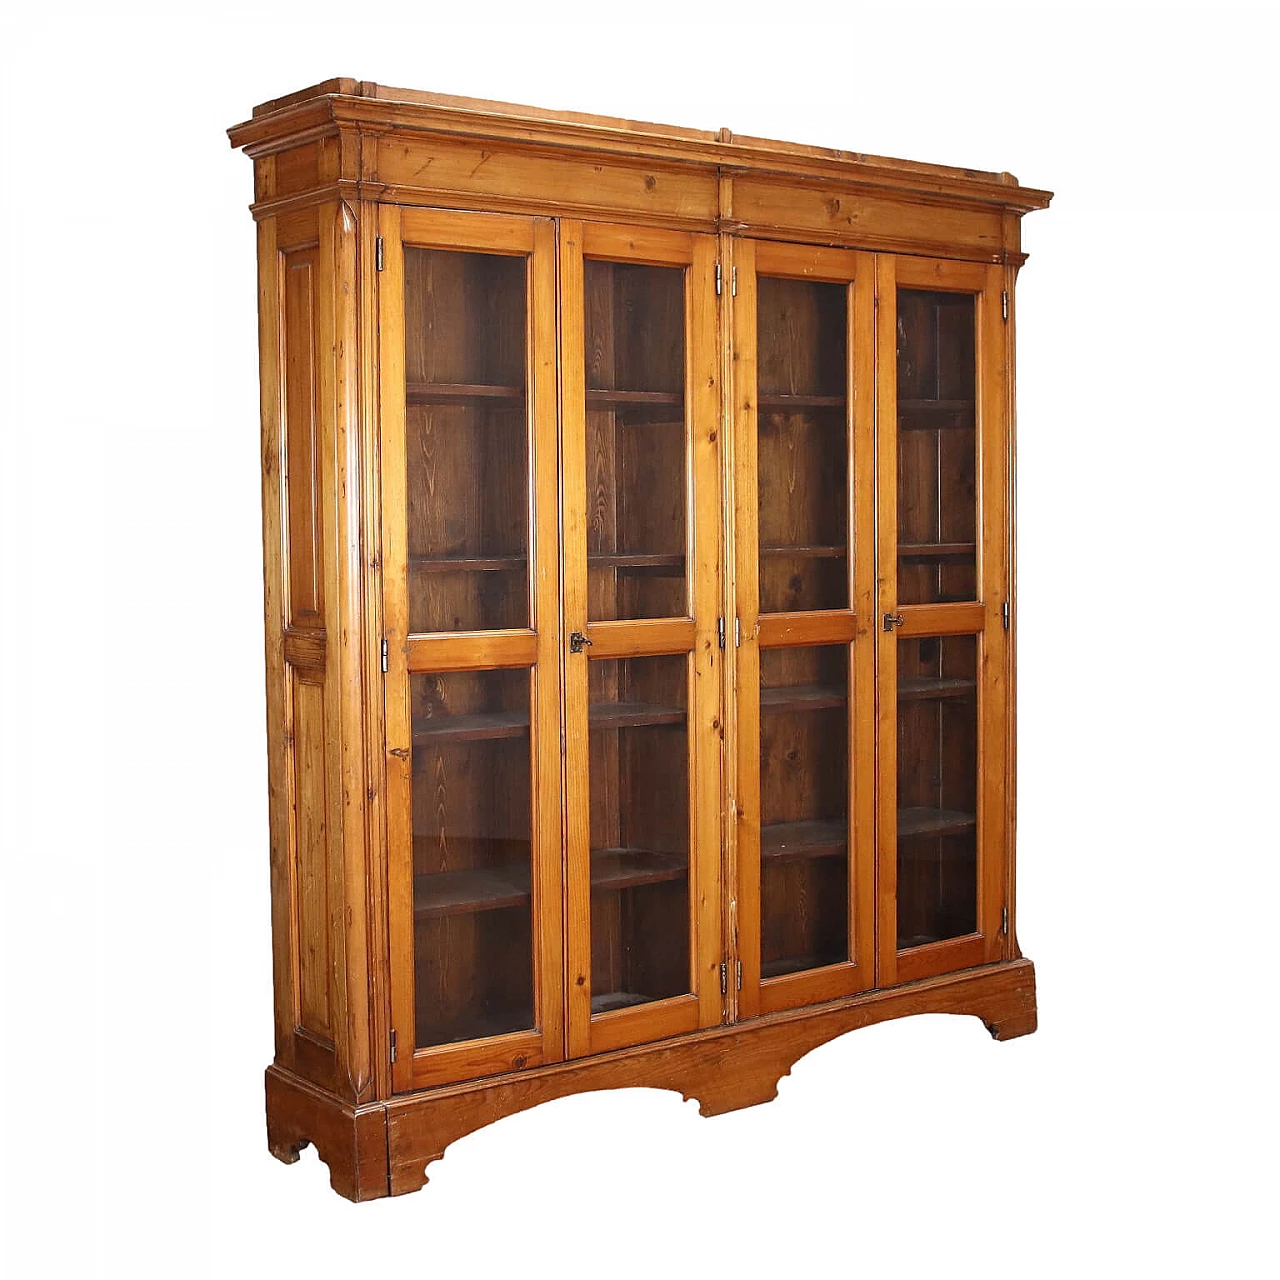 Spruce bookcase with glass doors, 19th century 1